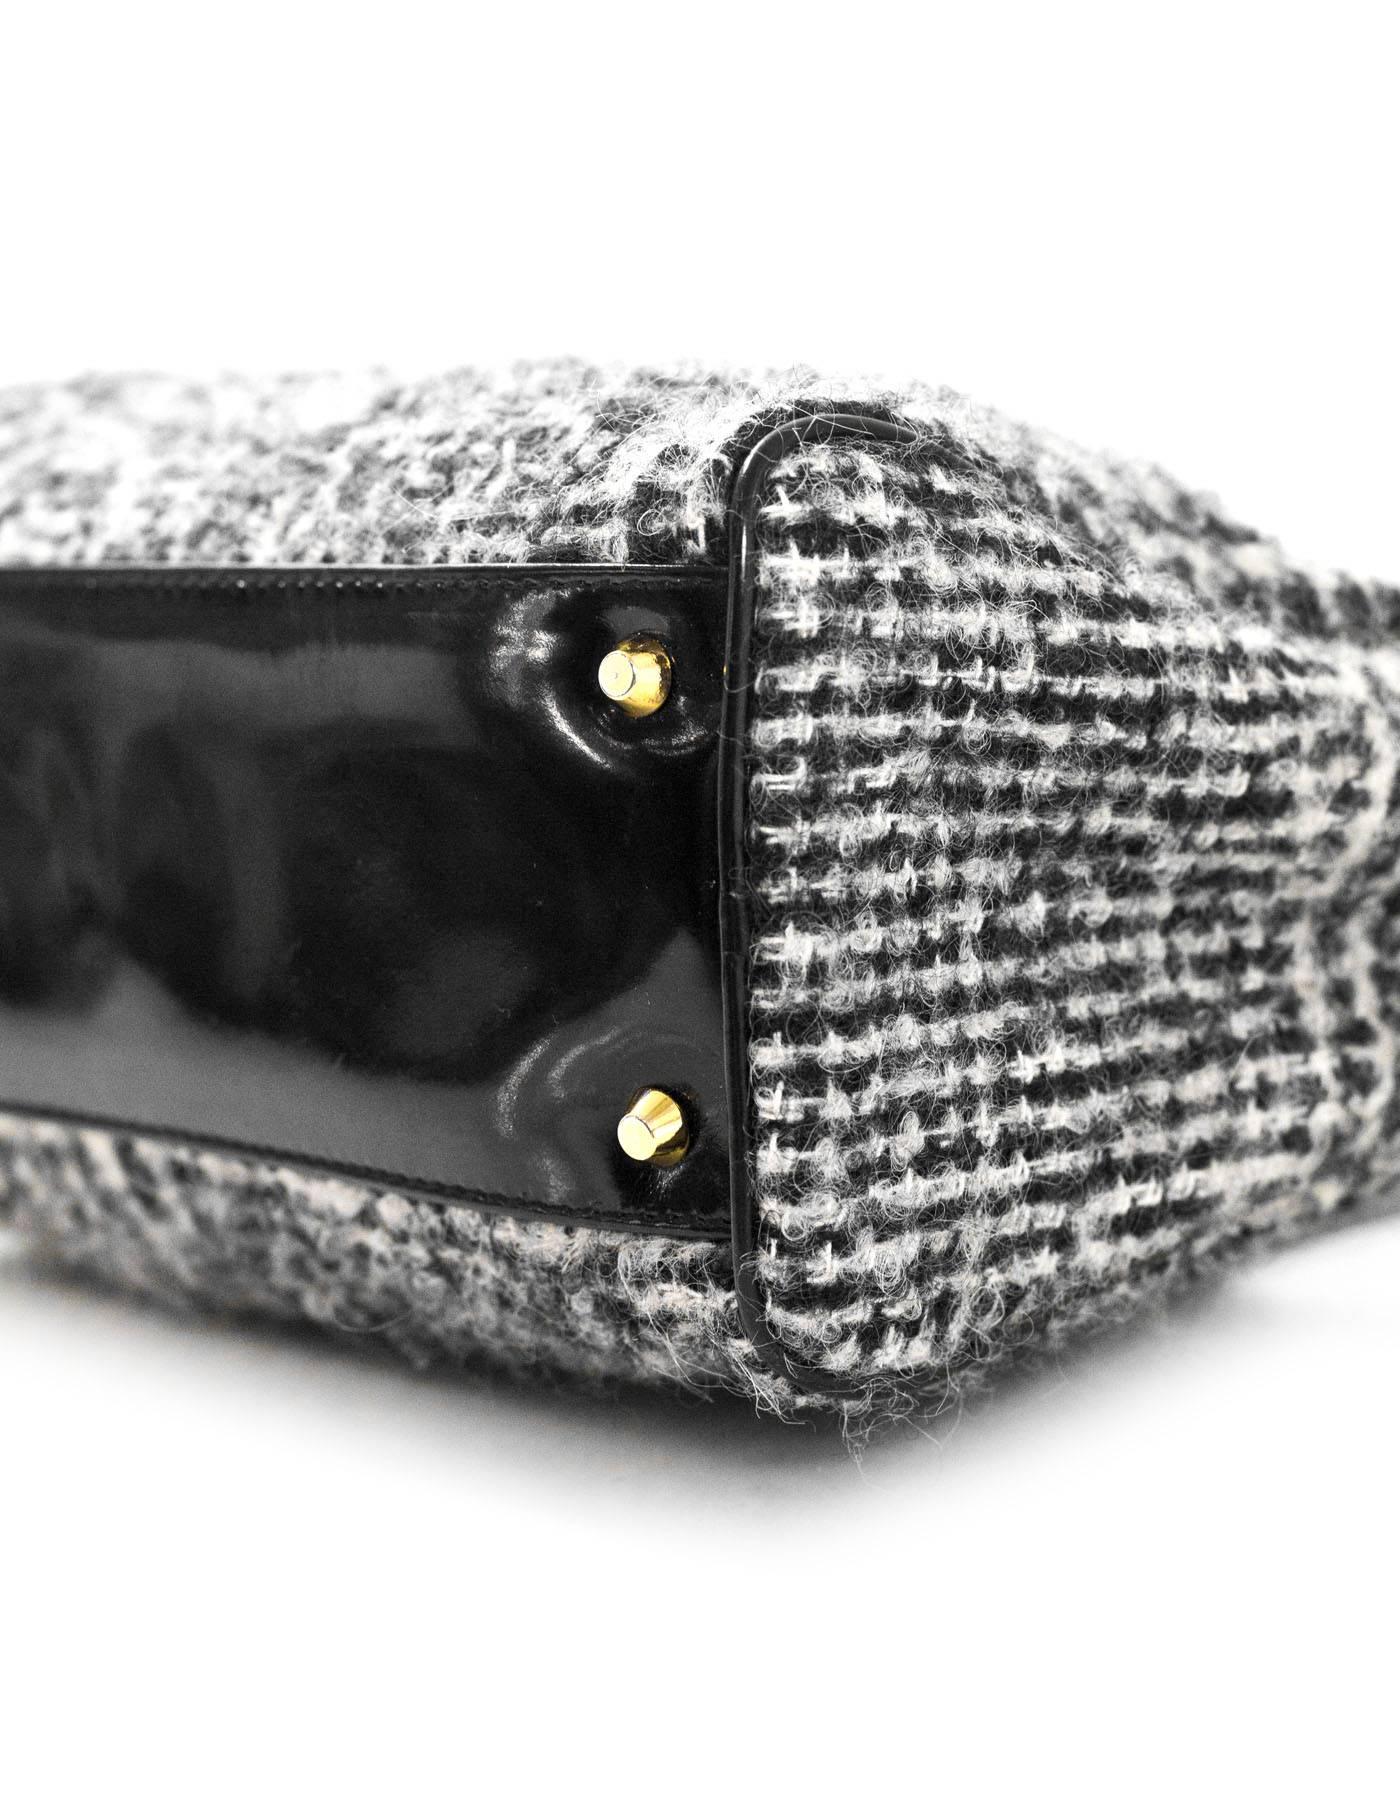 Dolce & Gabbana Black & White Tweed Herringbone Bag In Excellent Condition In New York, NY